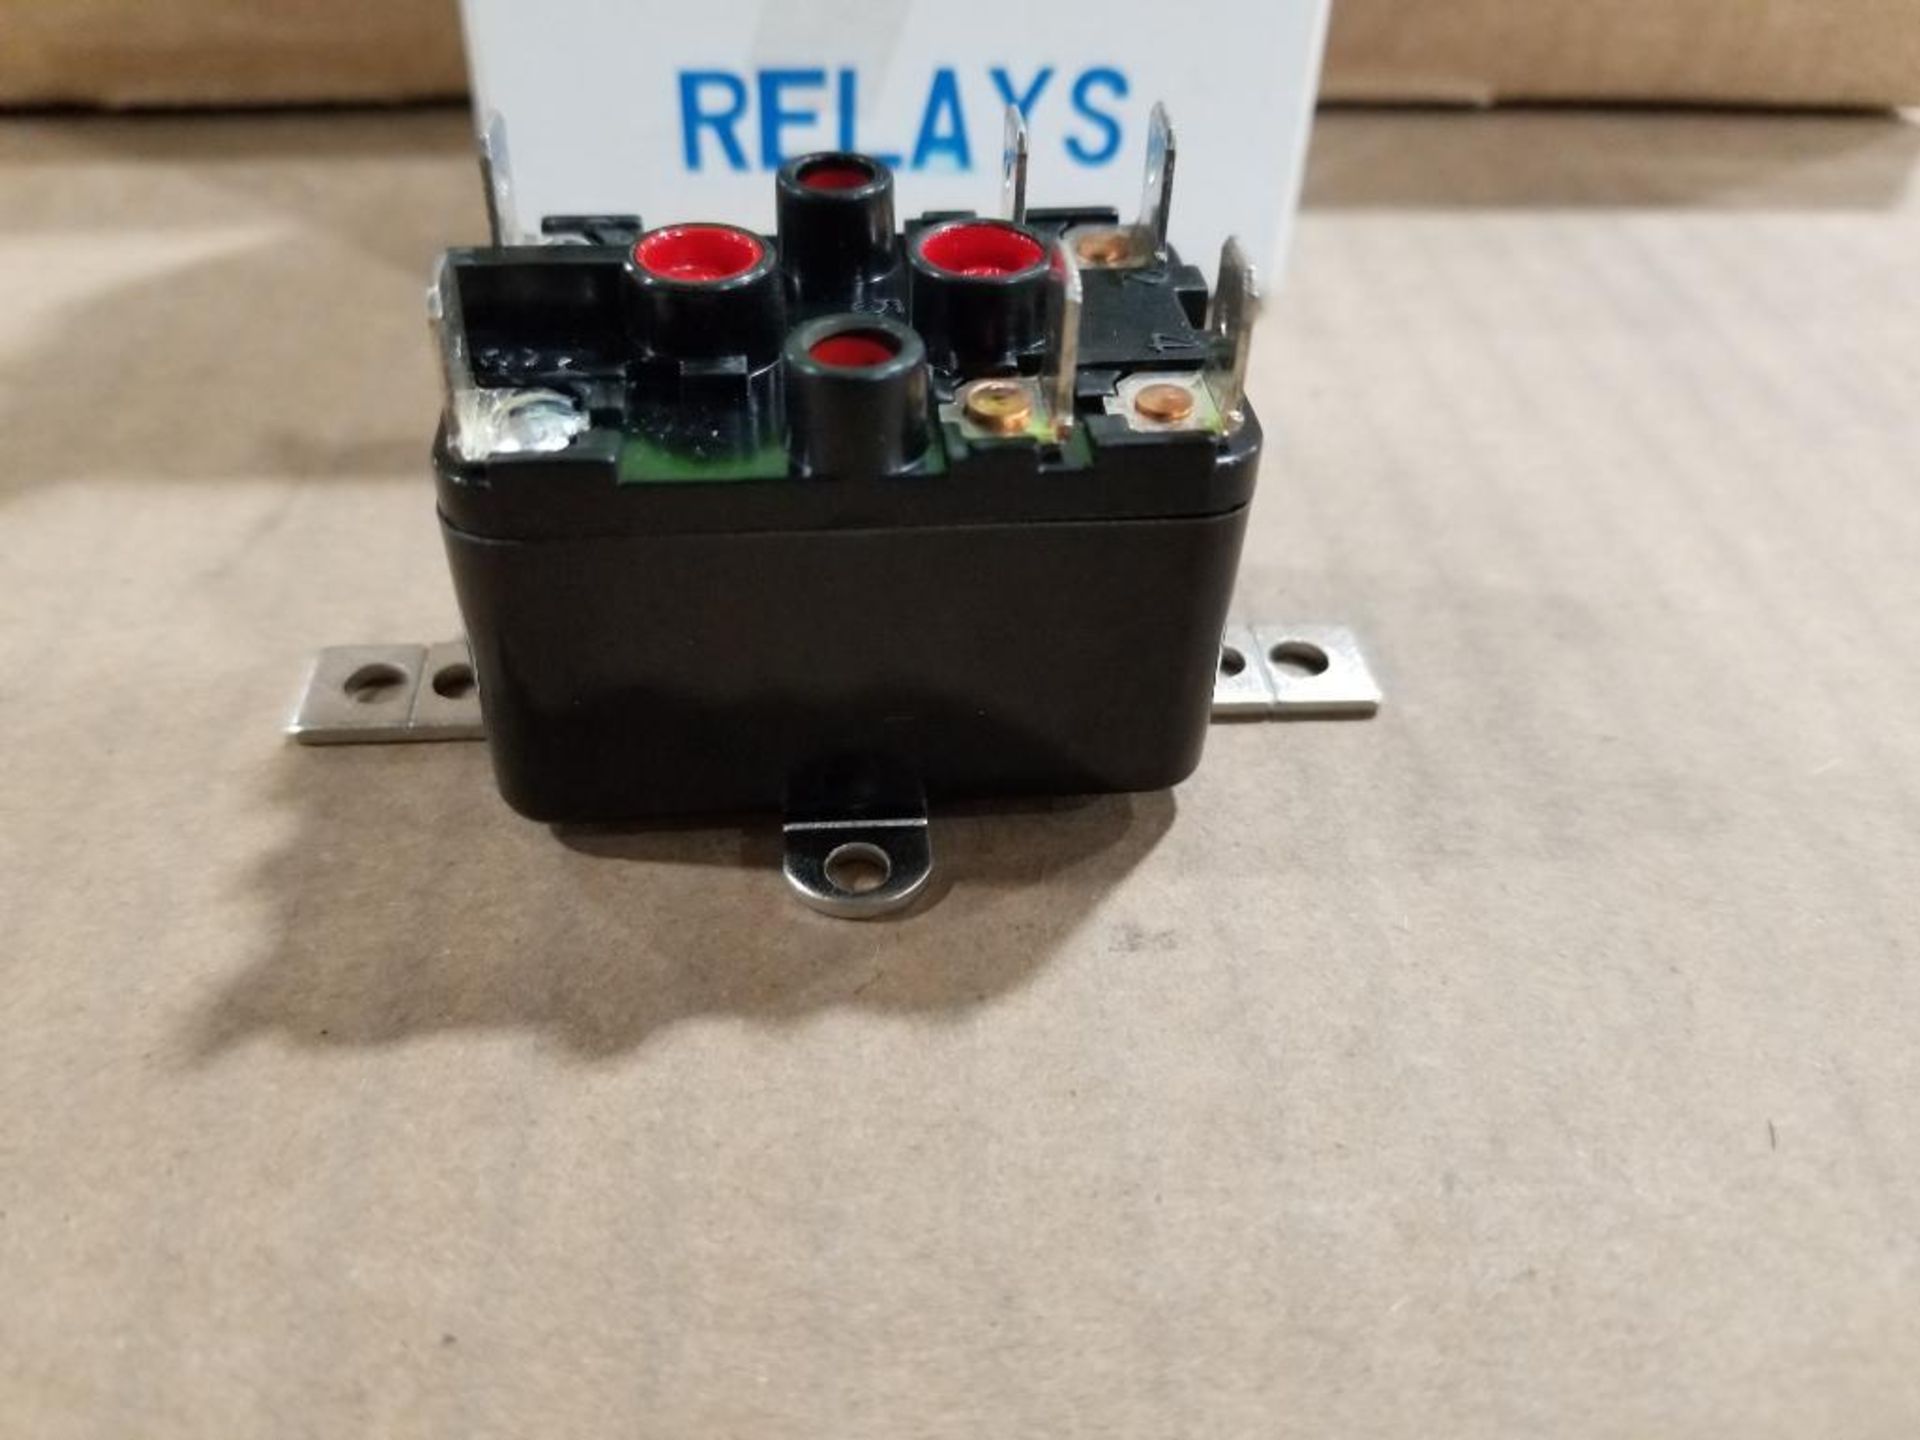 Qty 50 - Cam-stat general purpose relay. Part number AZ2900-1AB-120A. - Image 5 of 7